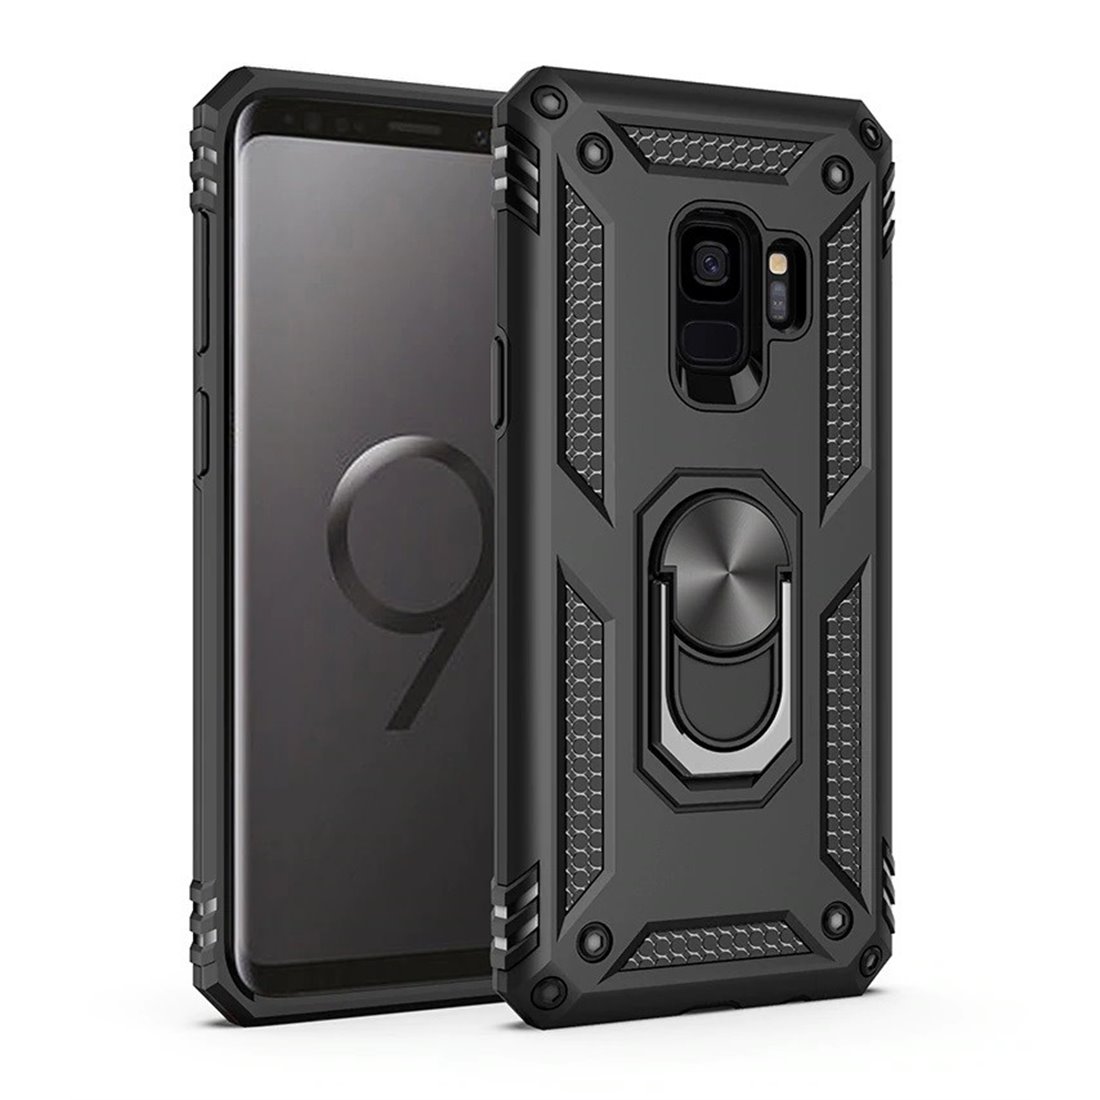 Samsung Galaxy S9 Plastic Black Back Cover - Solid ring